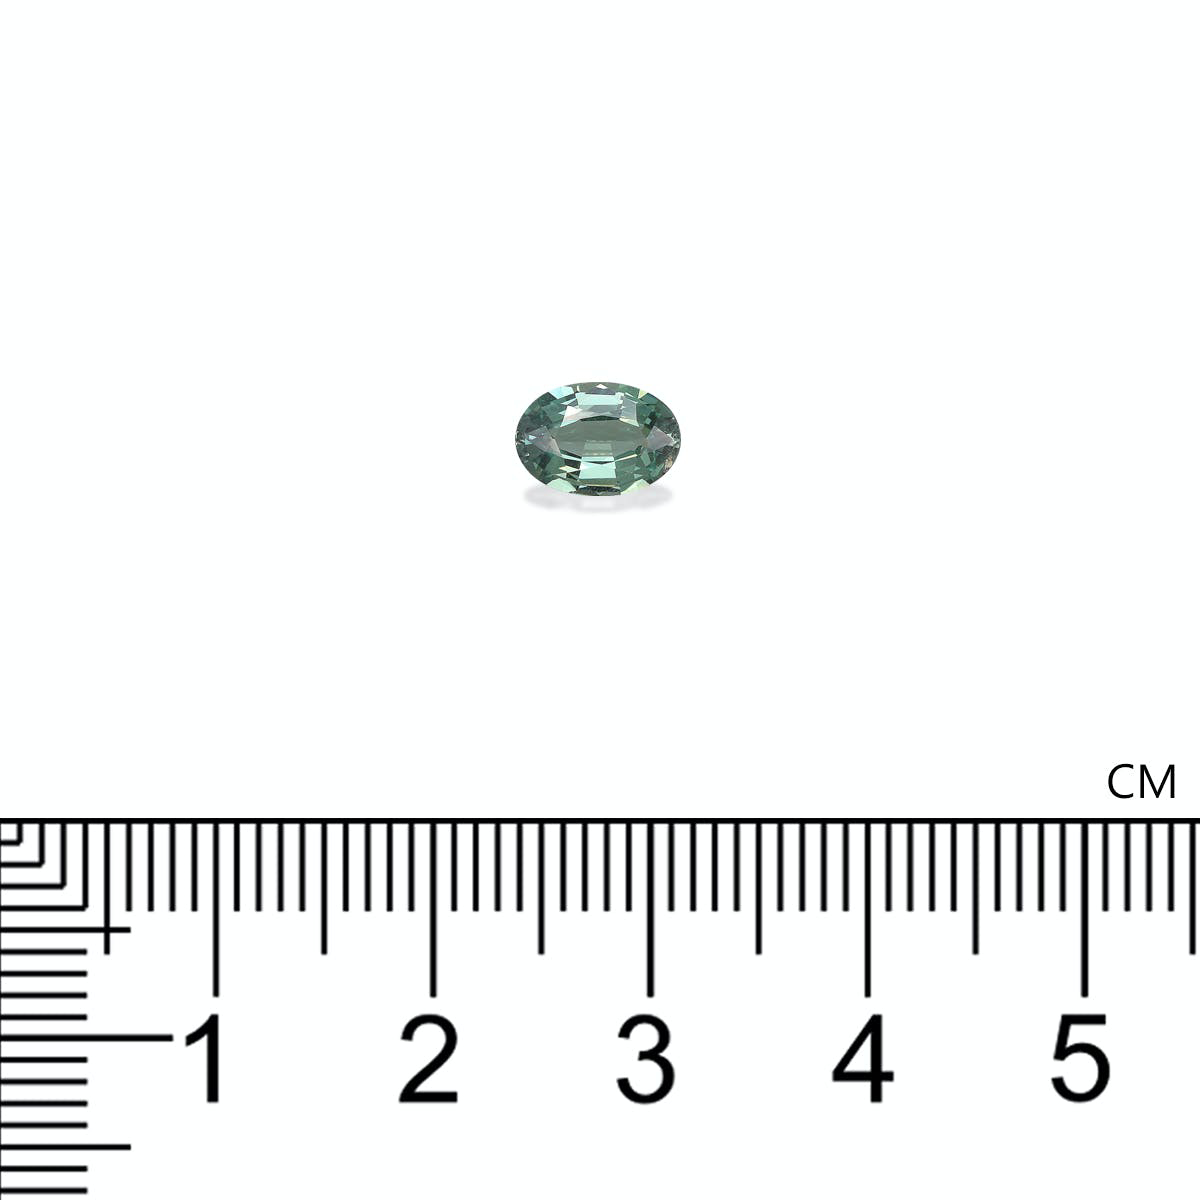 Picture of Color Change Green Alexandrite 0.89ct - 7x5mm (AL0094)